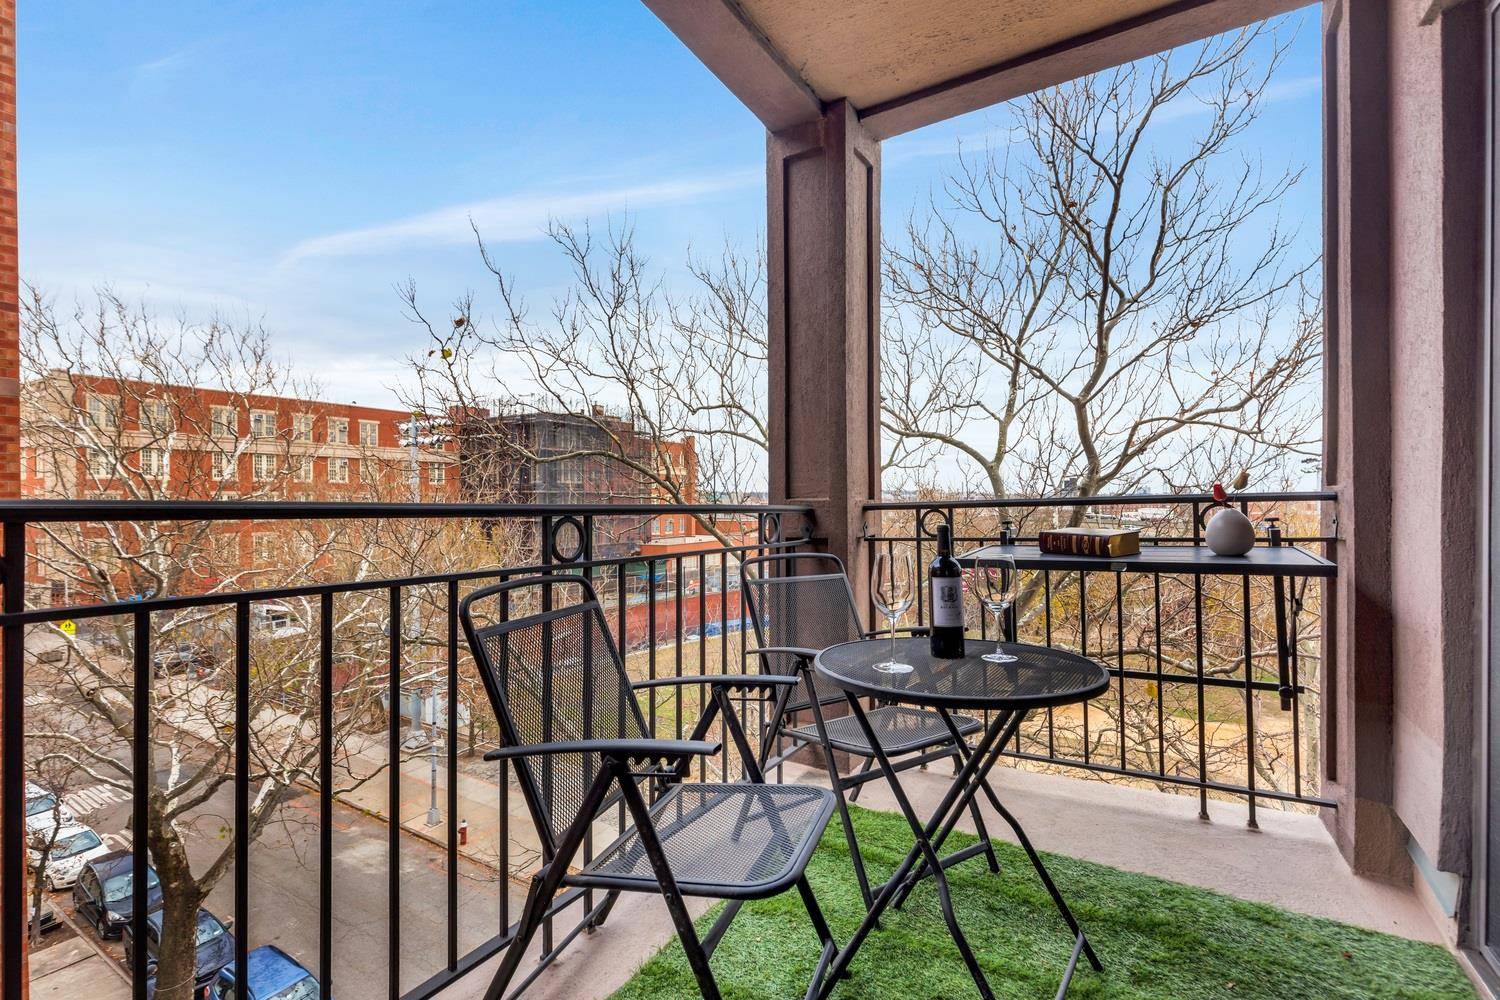 Welcome home to this bright amp ; spacious two bedroom Condo in prime Carroll Gardens, Brooklyn.